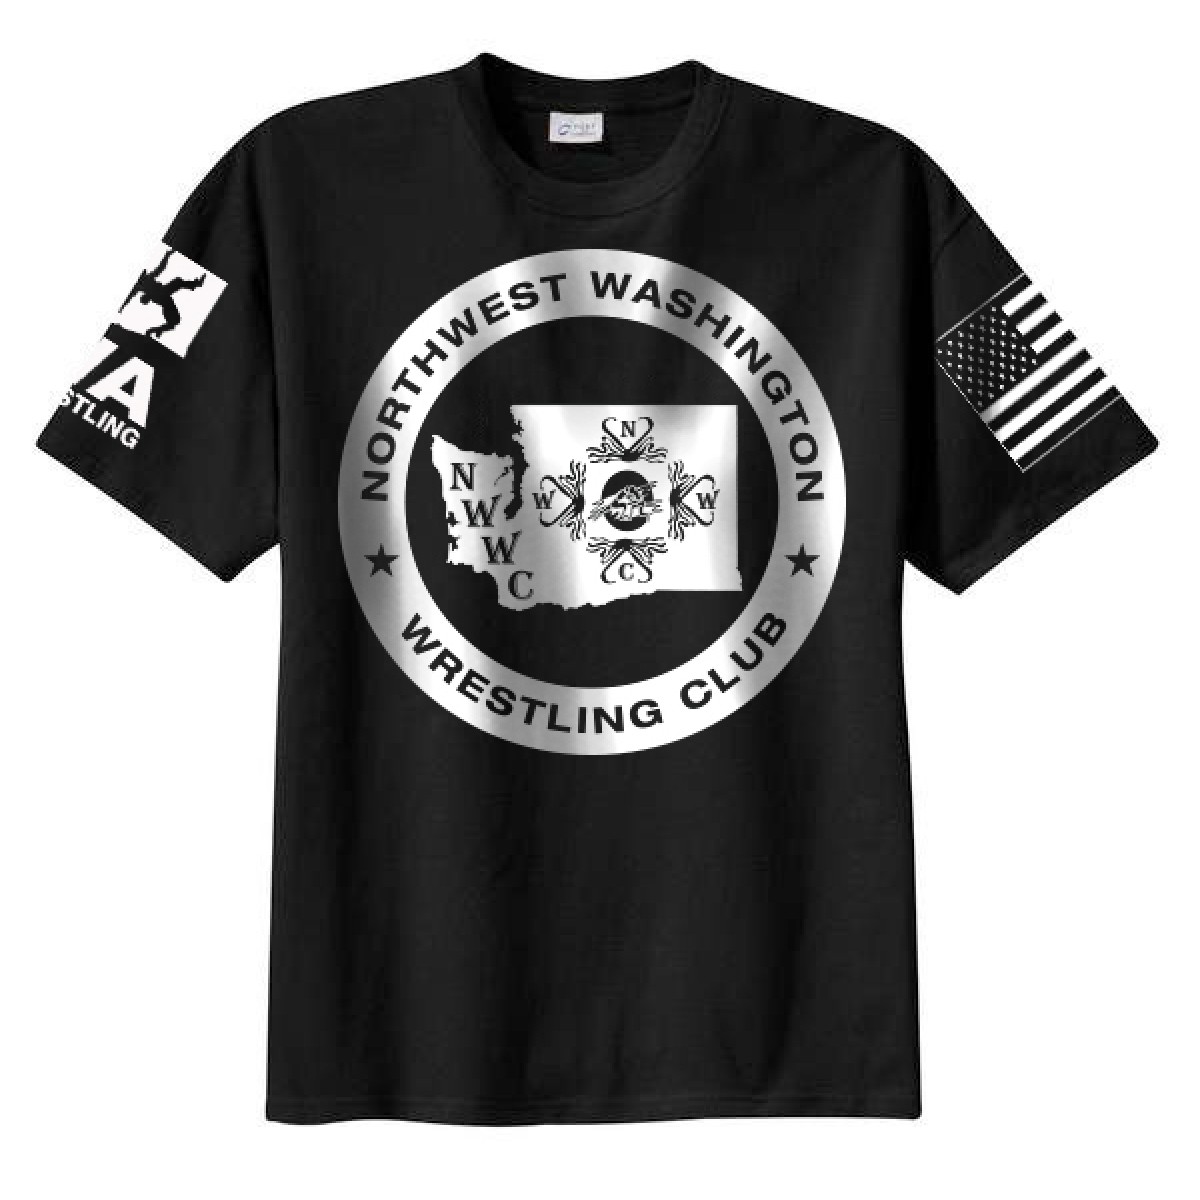 NWWC Black T-shirt With White Logo On The Front-Black-M